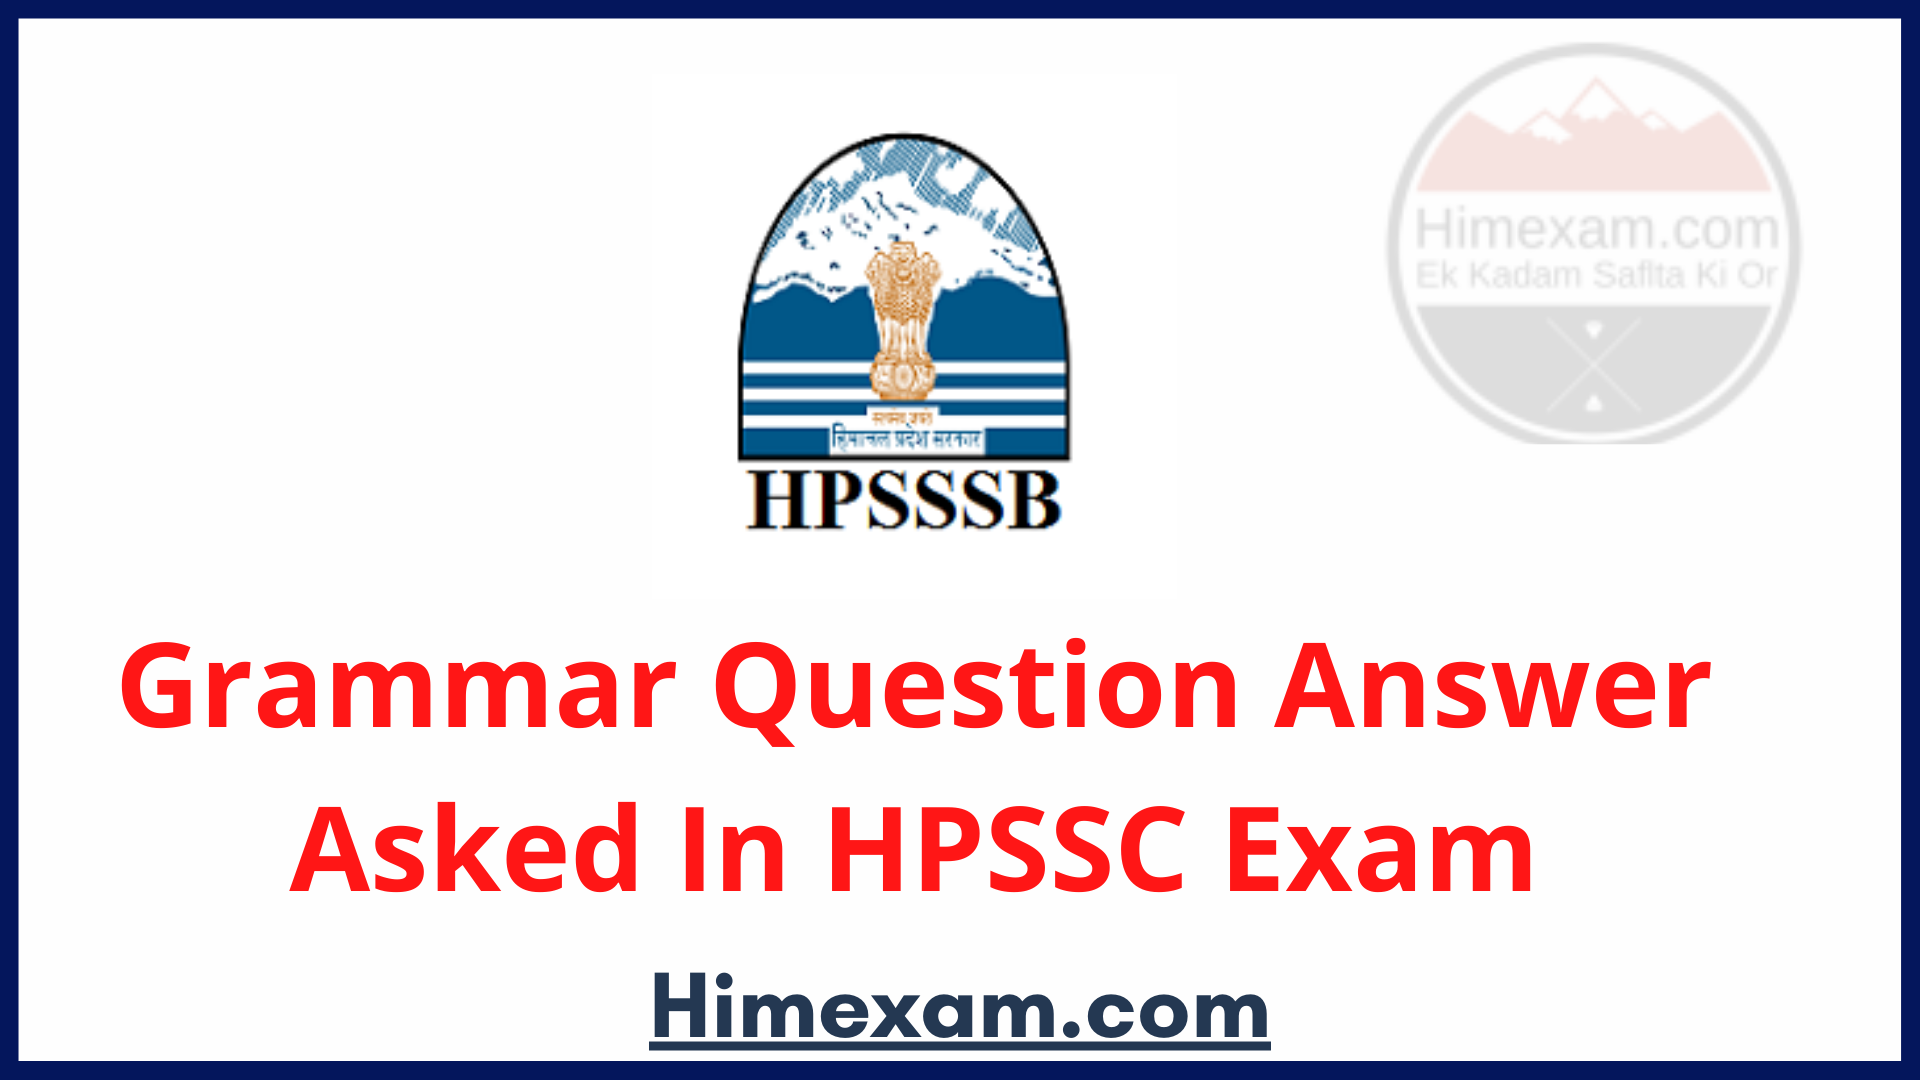 Grammar Question Answer Asked In HPSSC Exam